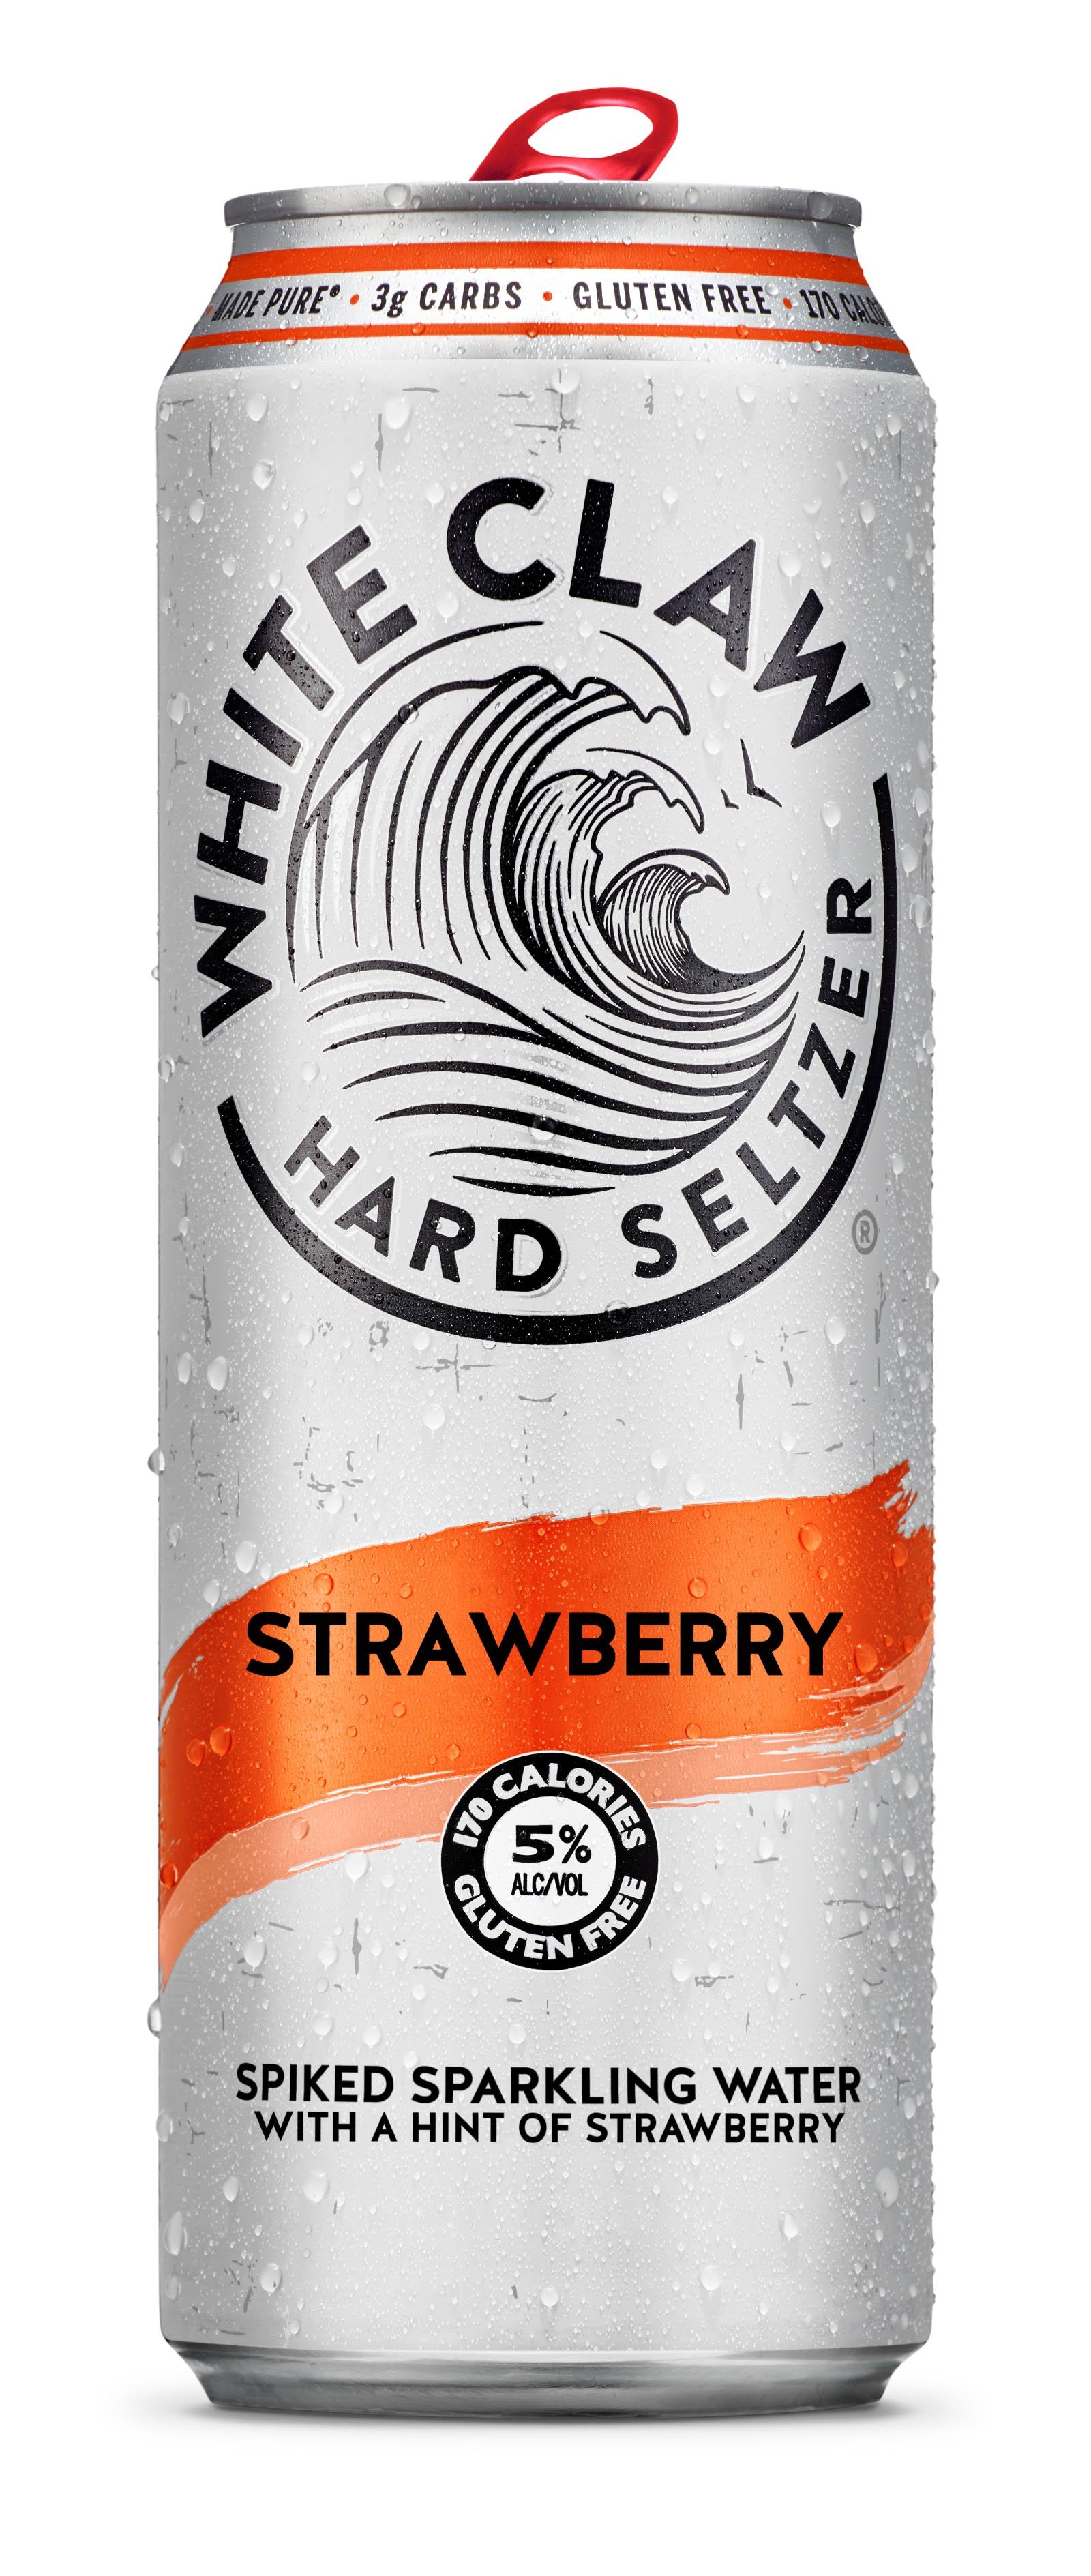 White Claw Hard Seltzer - Strawberry (19.2oz can)